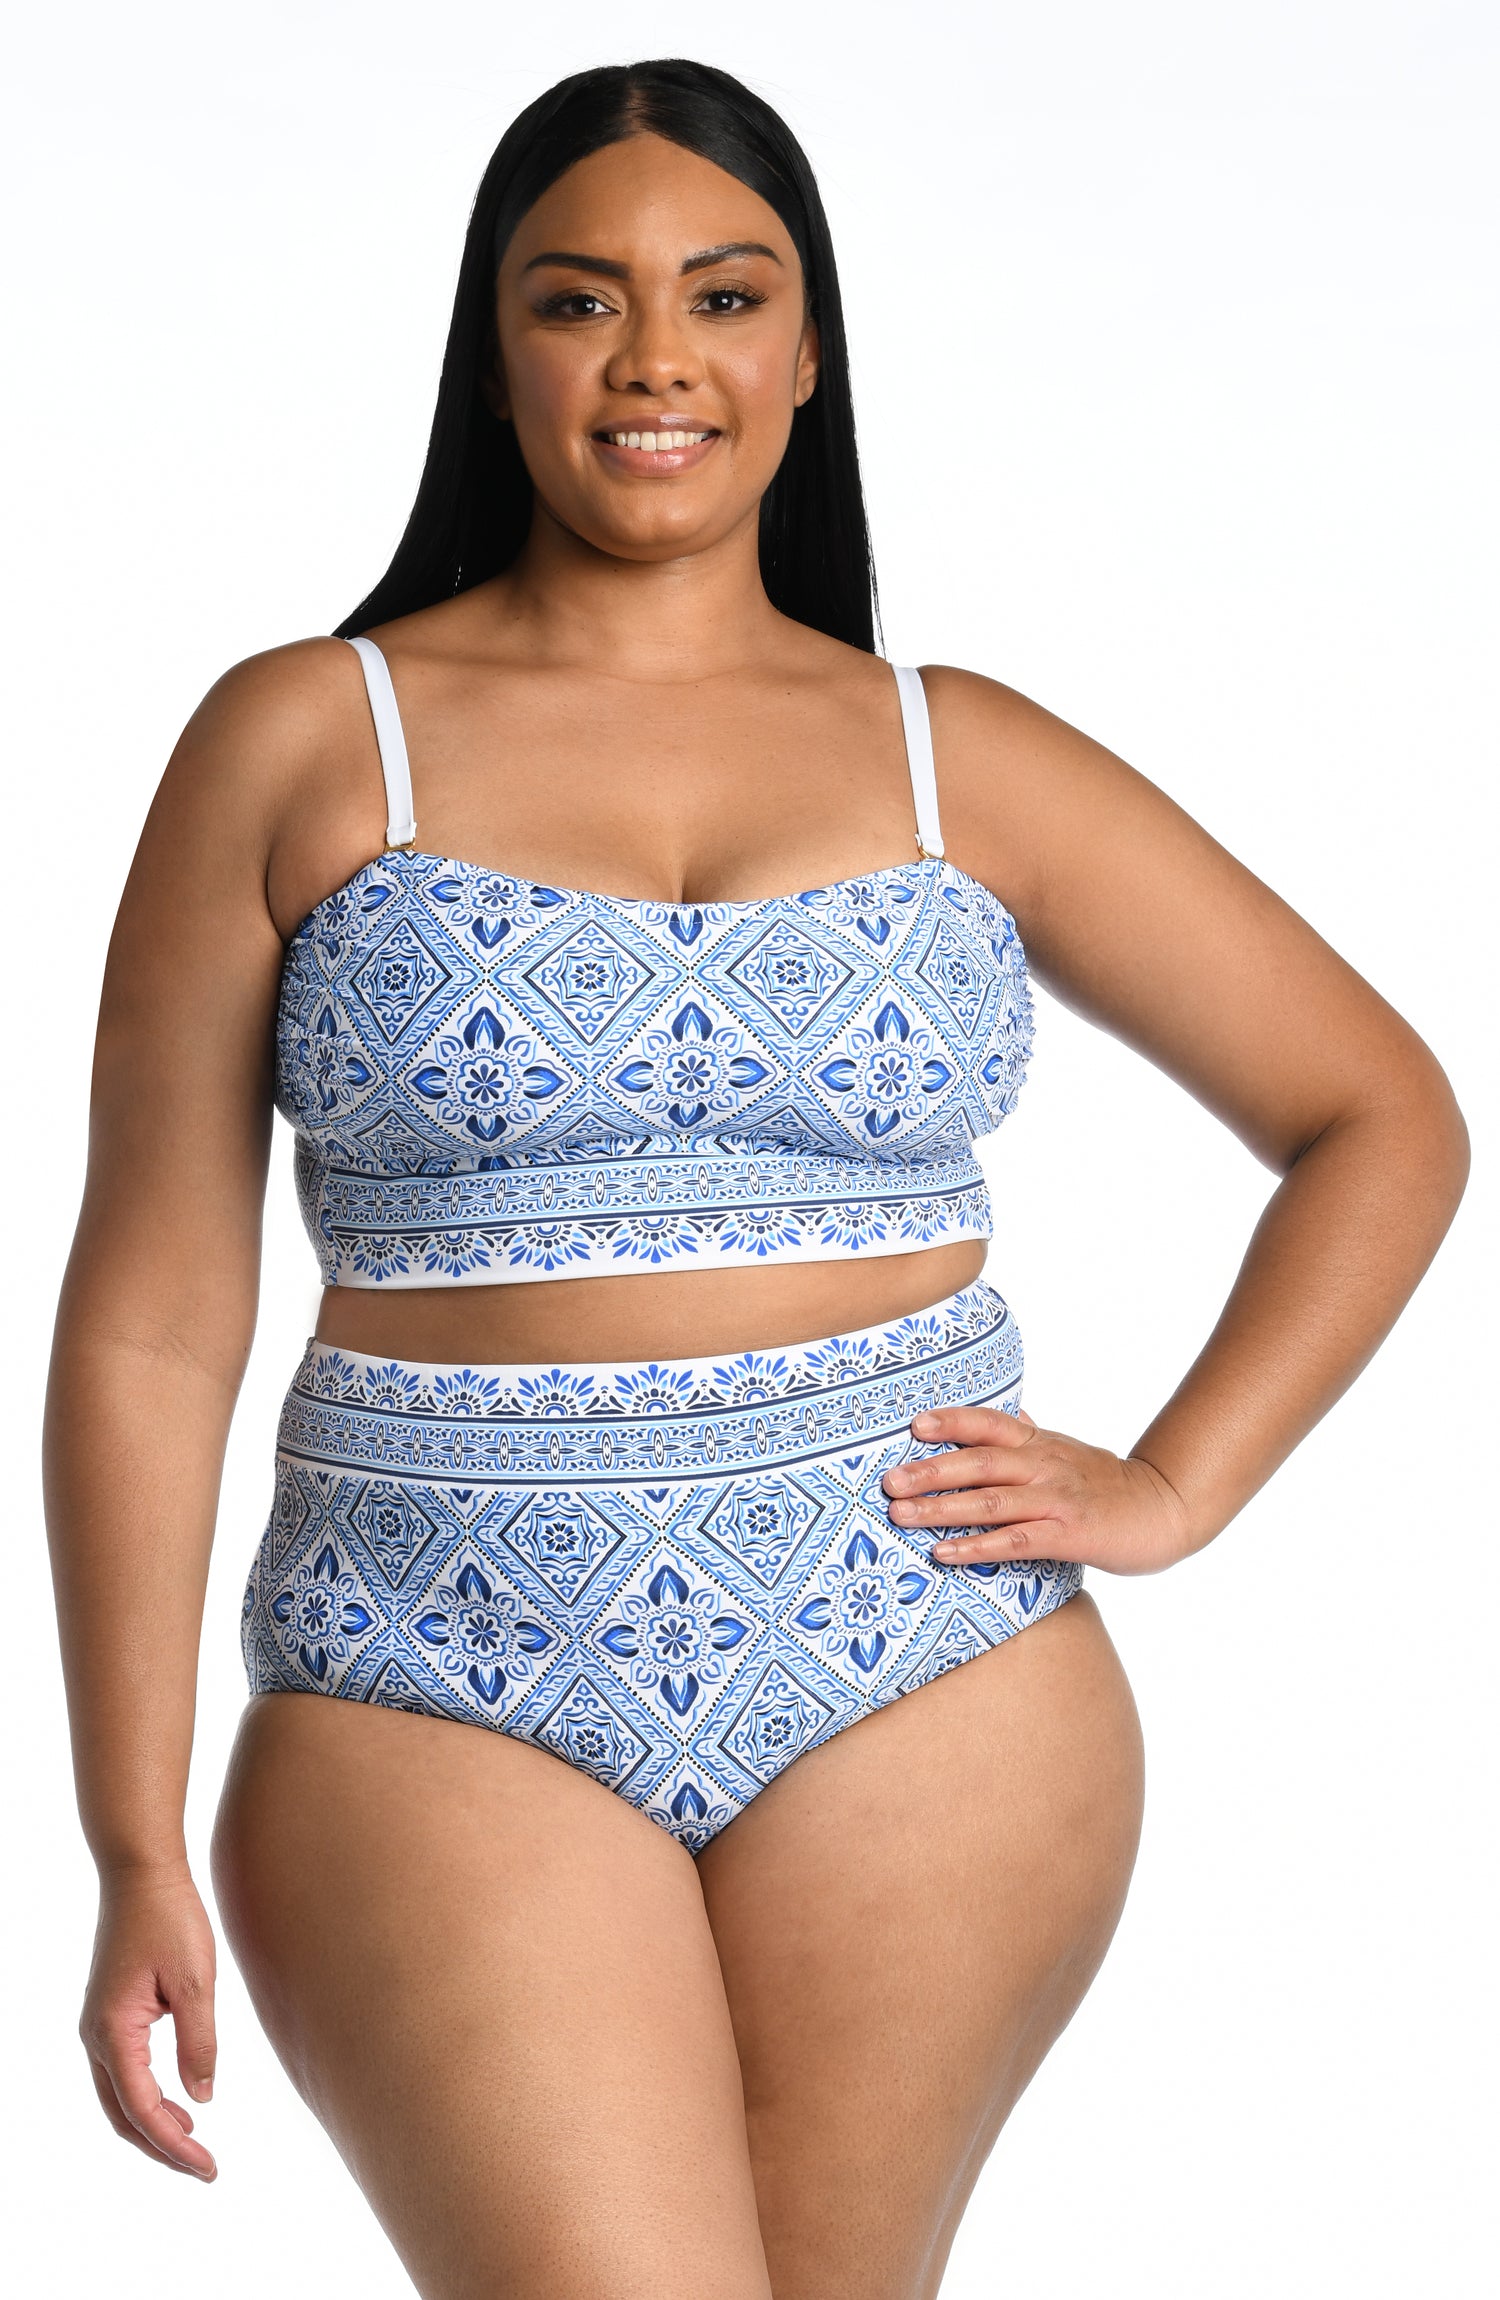 Model is wearing a light blue artful mosaic printed midkini swimsuit top from our Mediterranean Breeze collection.